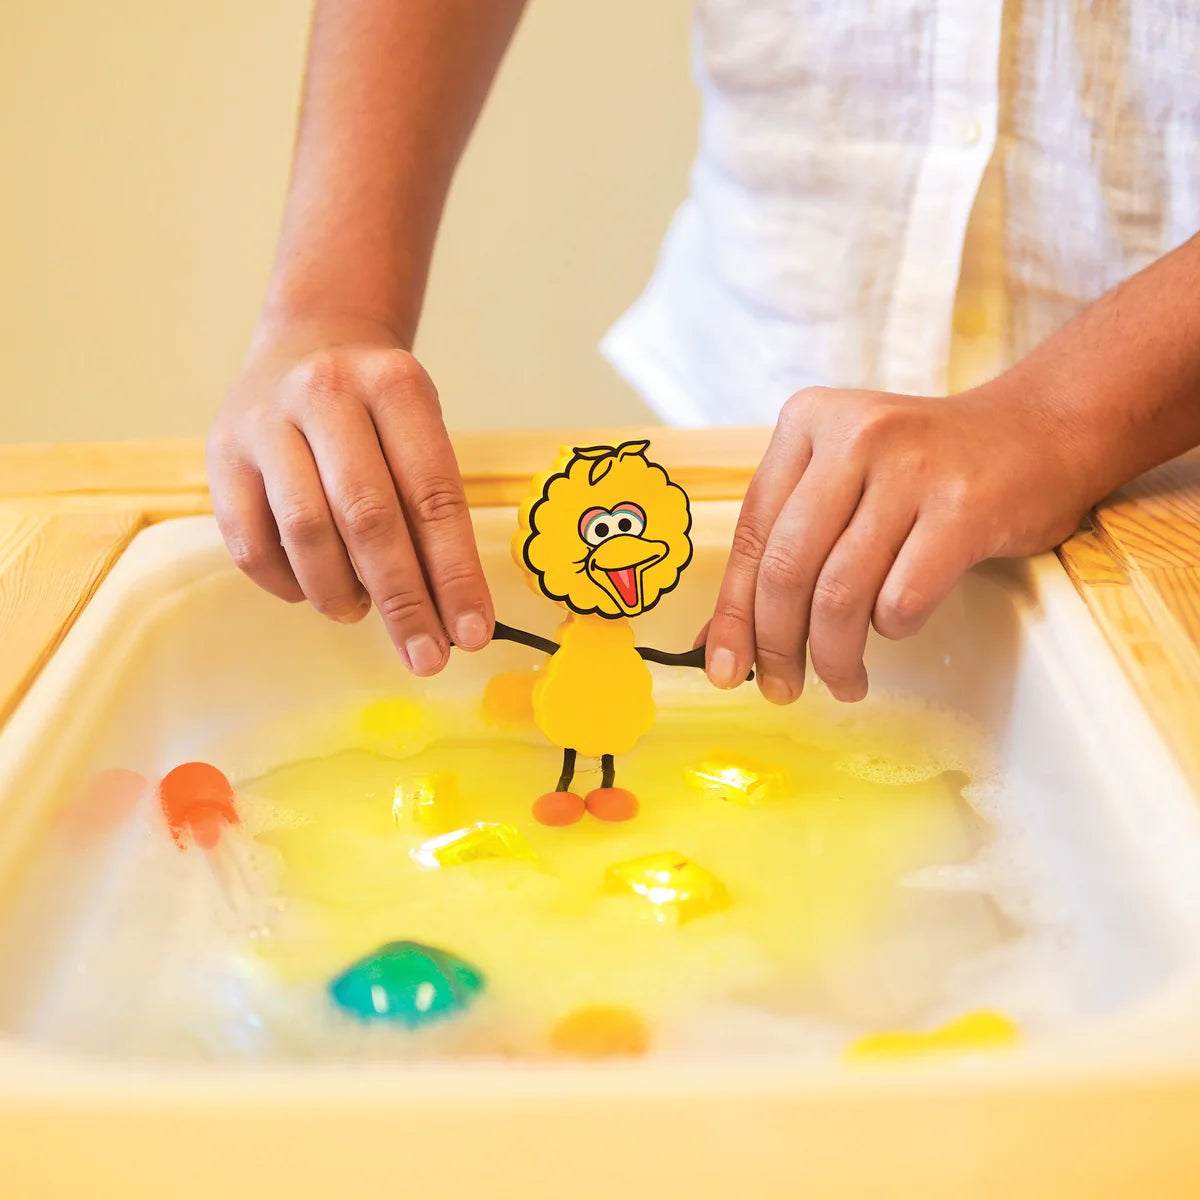 Glo Pals: A guy and glowing sensory cubes for water light-up sensors toy sesame street